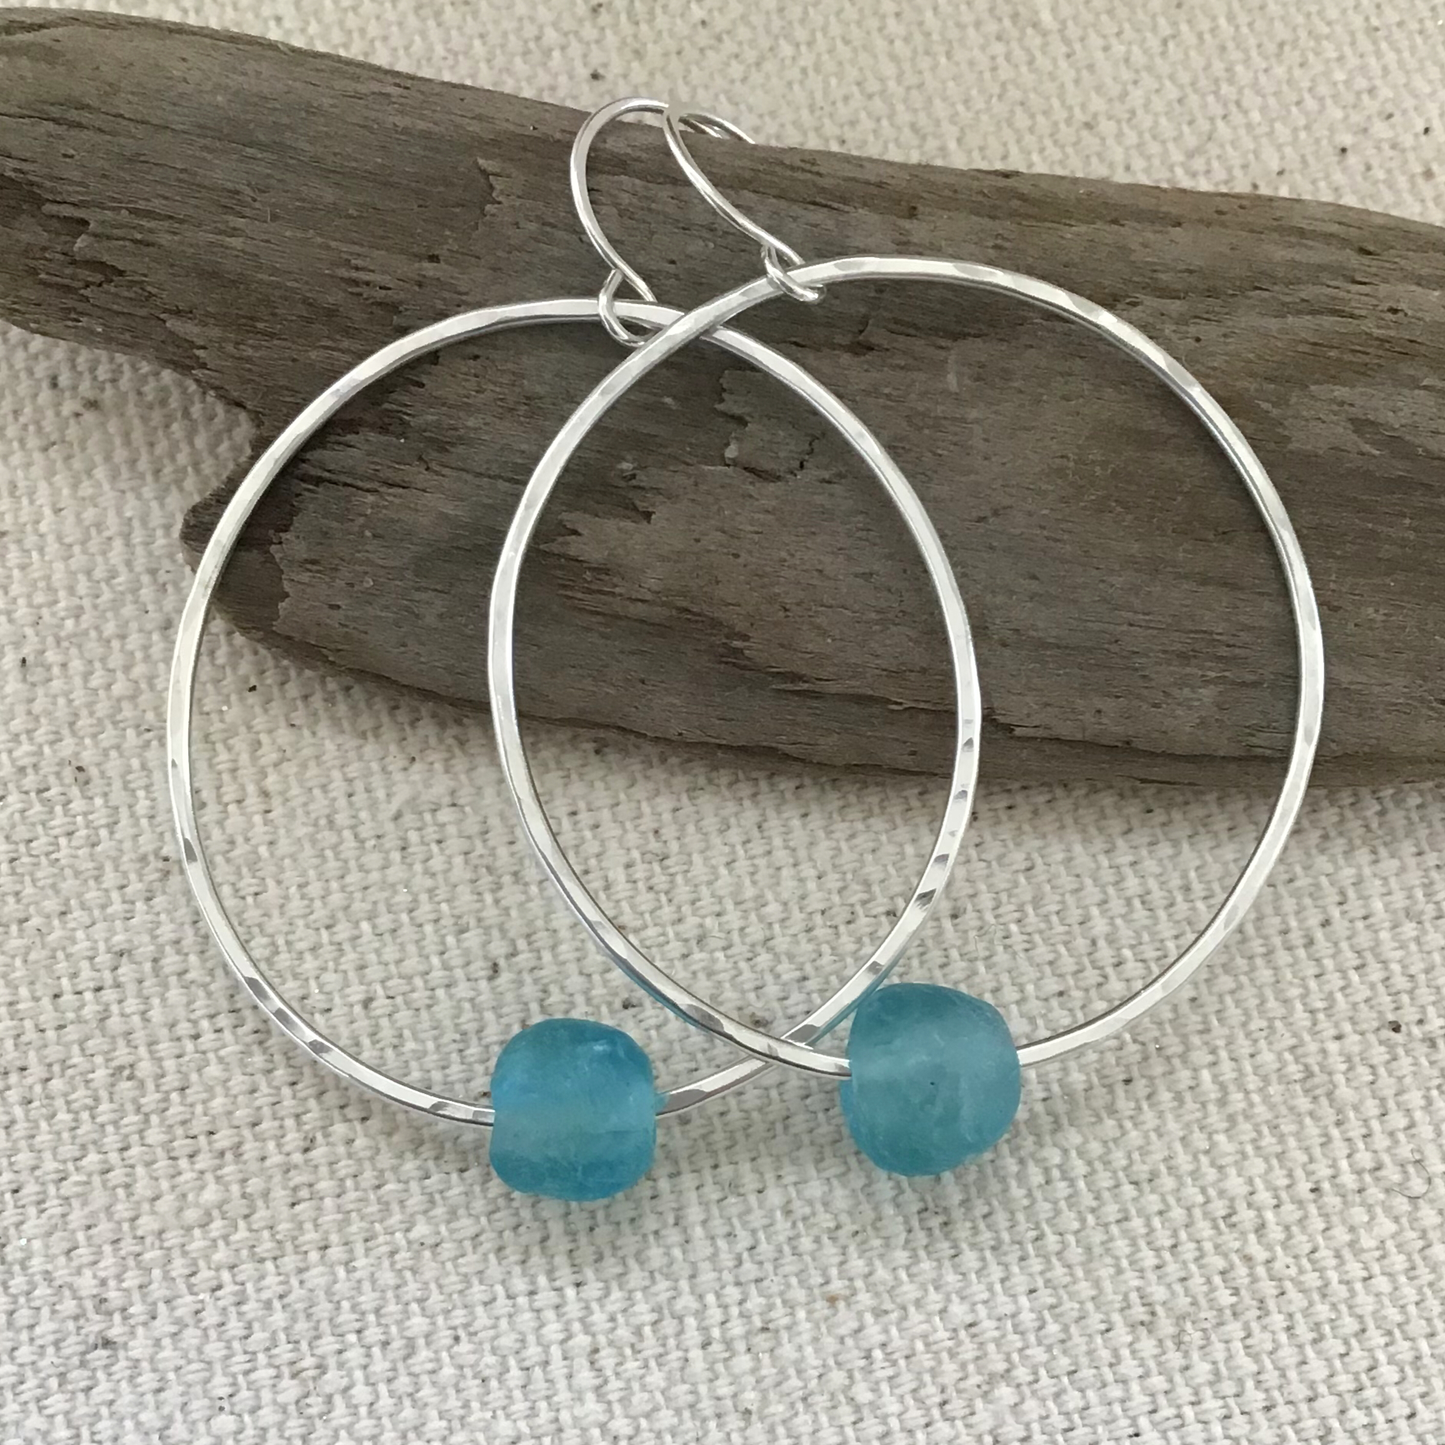 Circle Hoop Earrings with Single Floating Recycled Glass Bead - Turquoise Blue